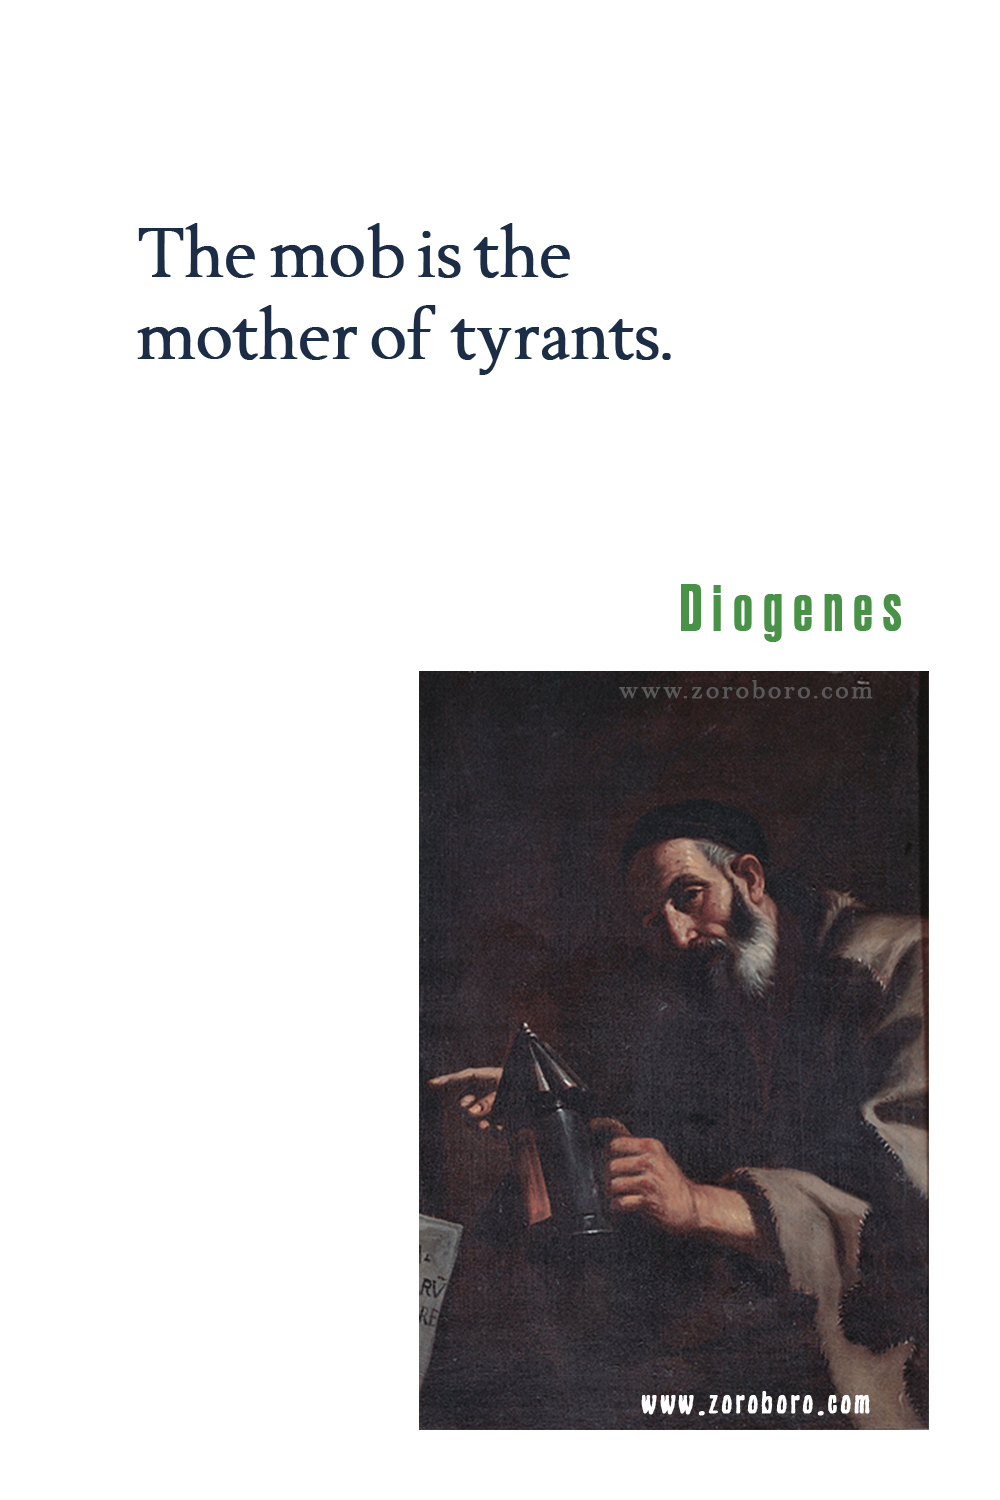 Diogenes Quotes. Diogenes Philosophy, Diogenes Books Quotes, Diogenes Dogs, Wisdom, Enemies, Friendship, & Virtue Quotes. Diogenes